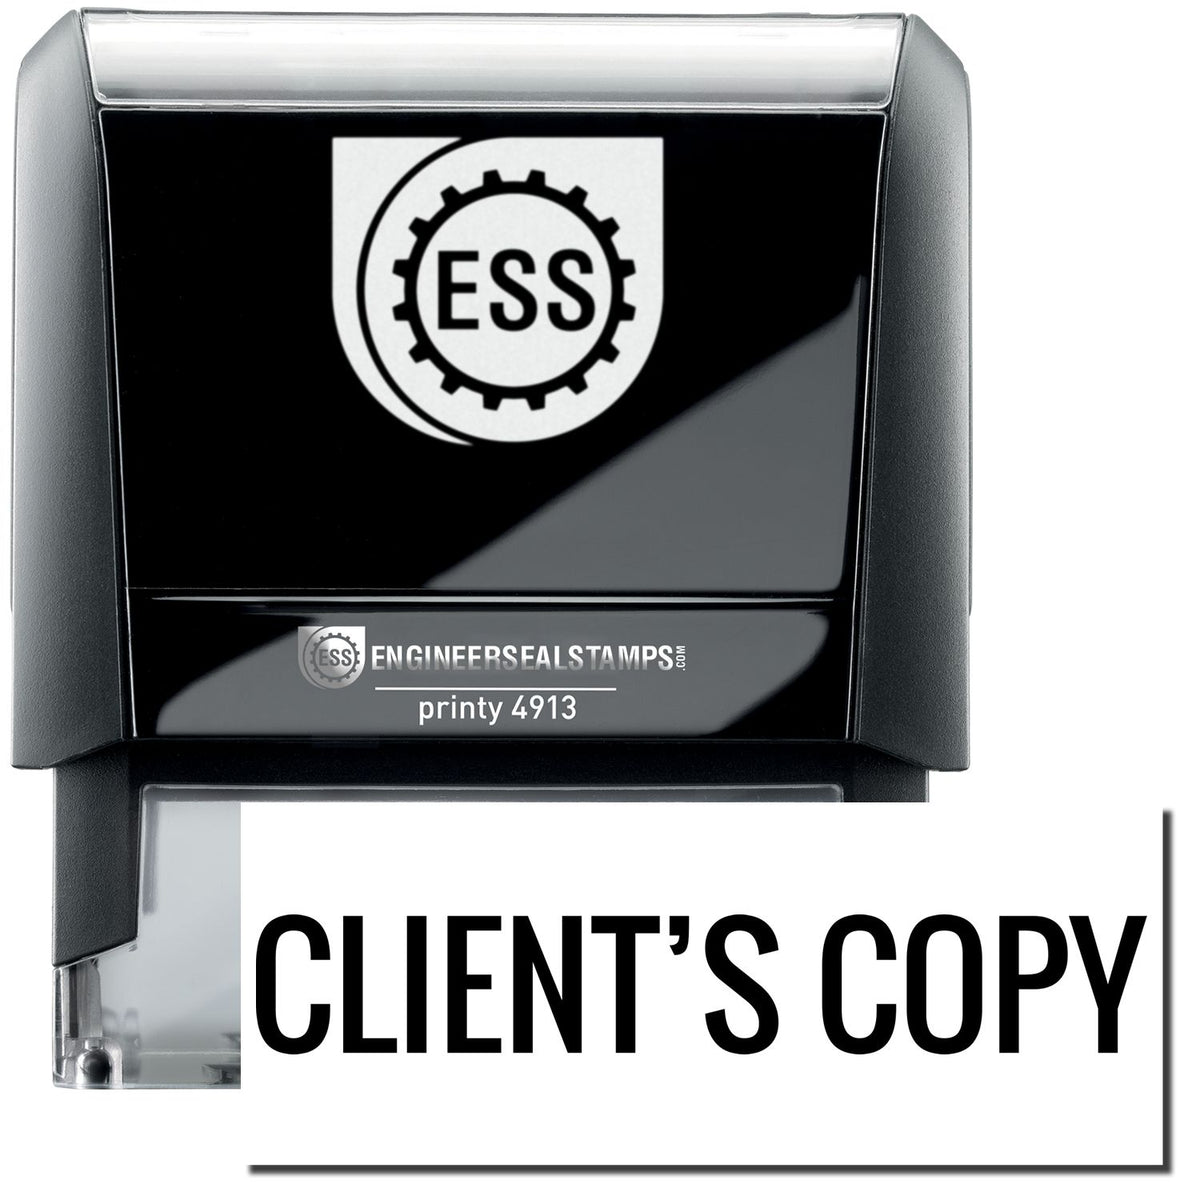 A self-inking stamp with a stamped image showing how the text &quot;CLIENT&#39;S COPY&quot; in a large font is displayed by it after stamping.